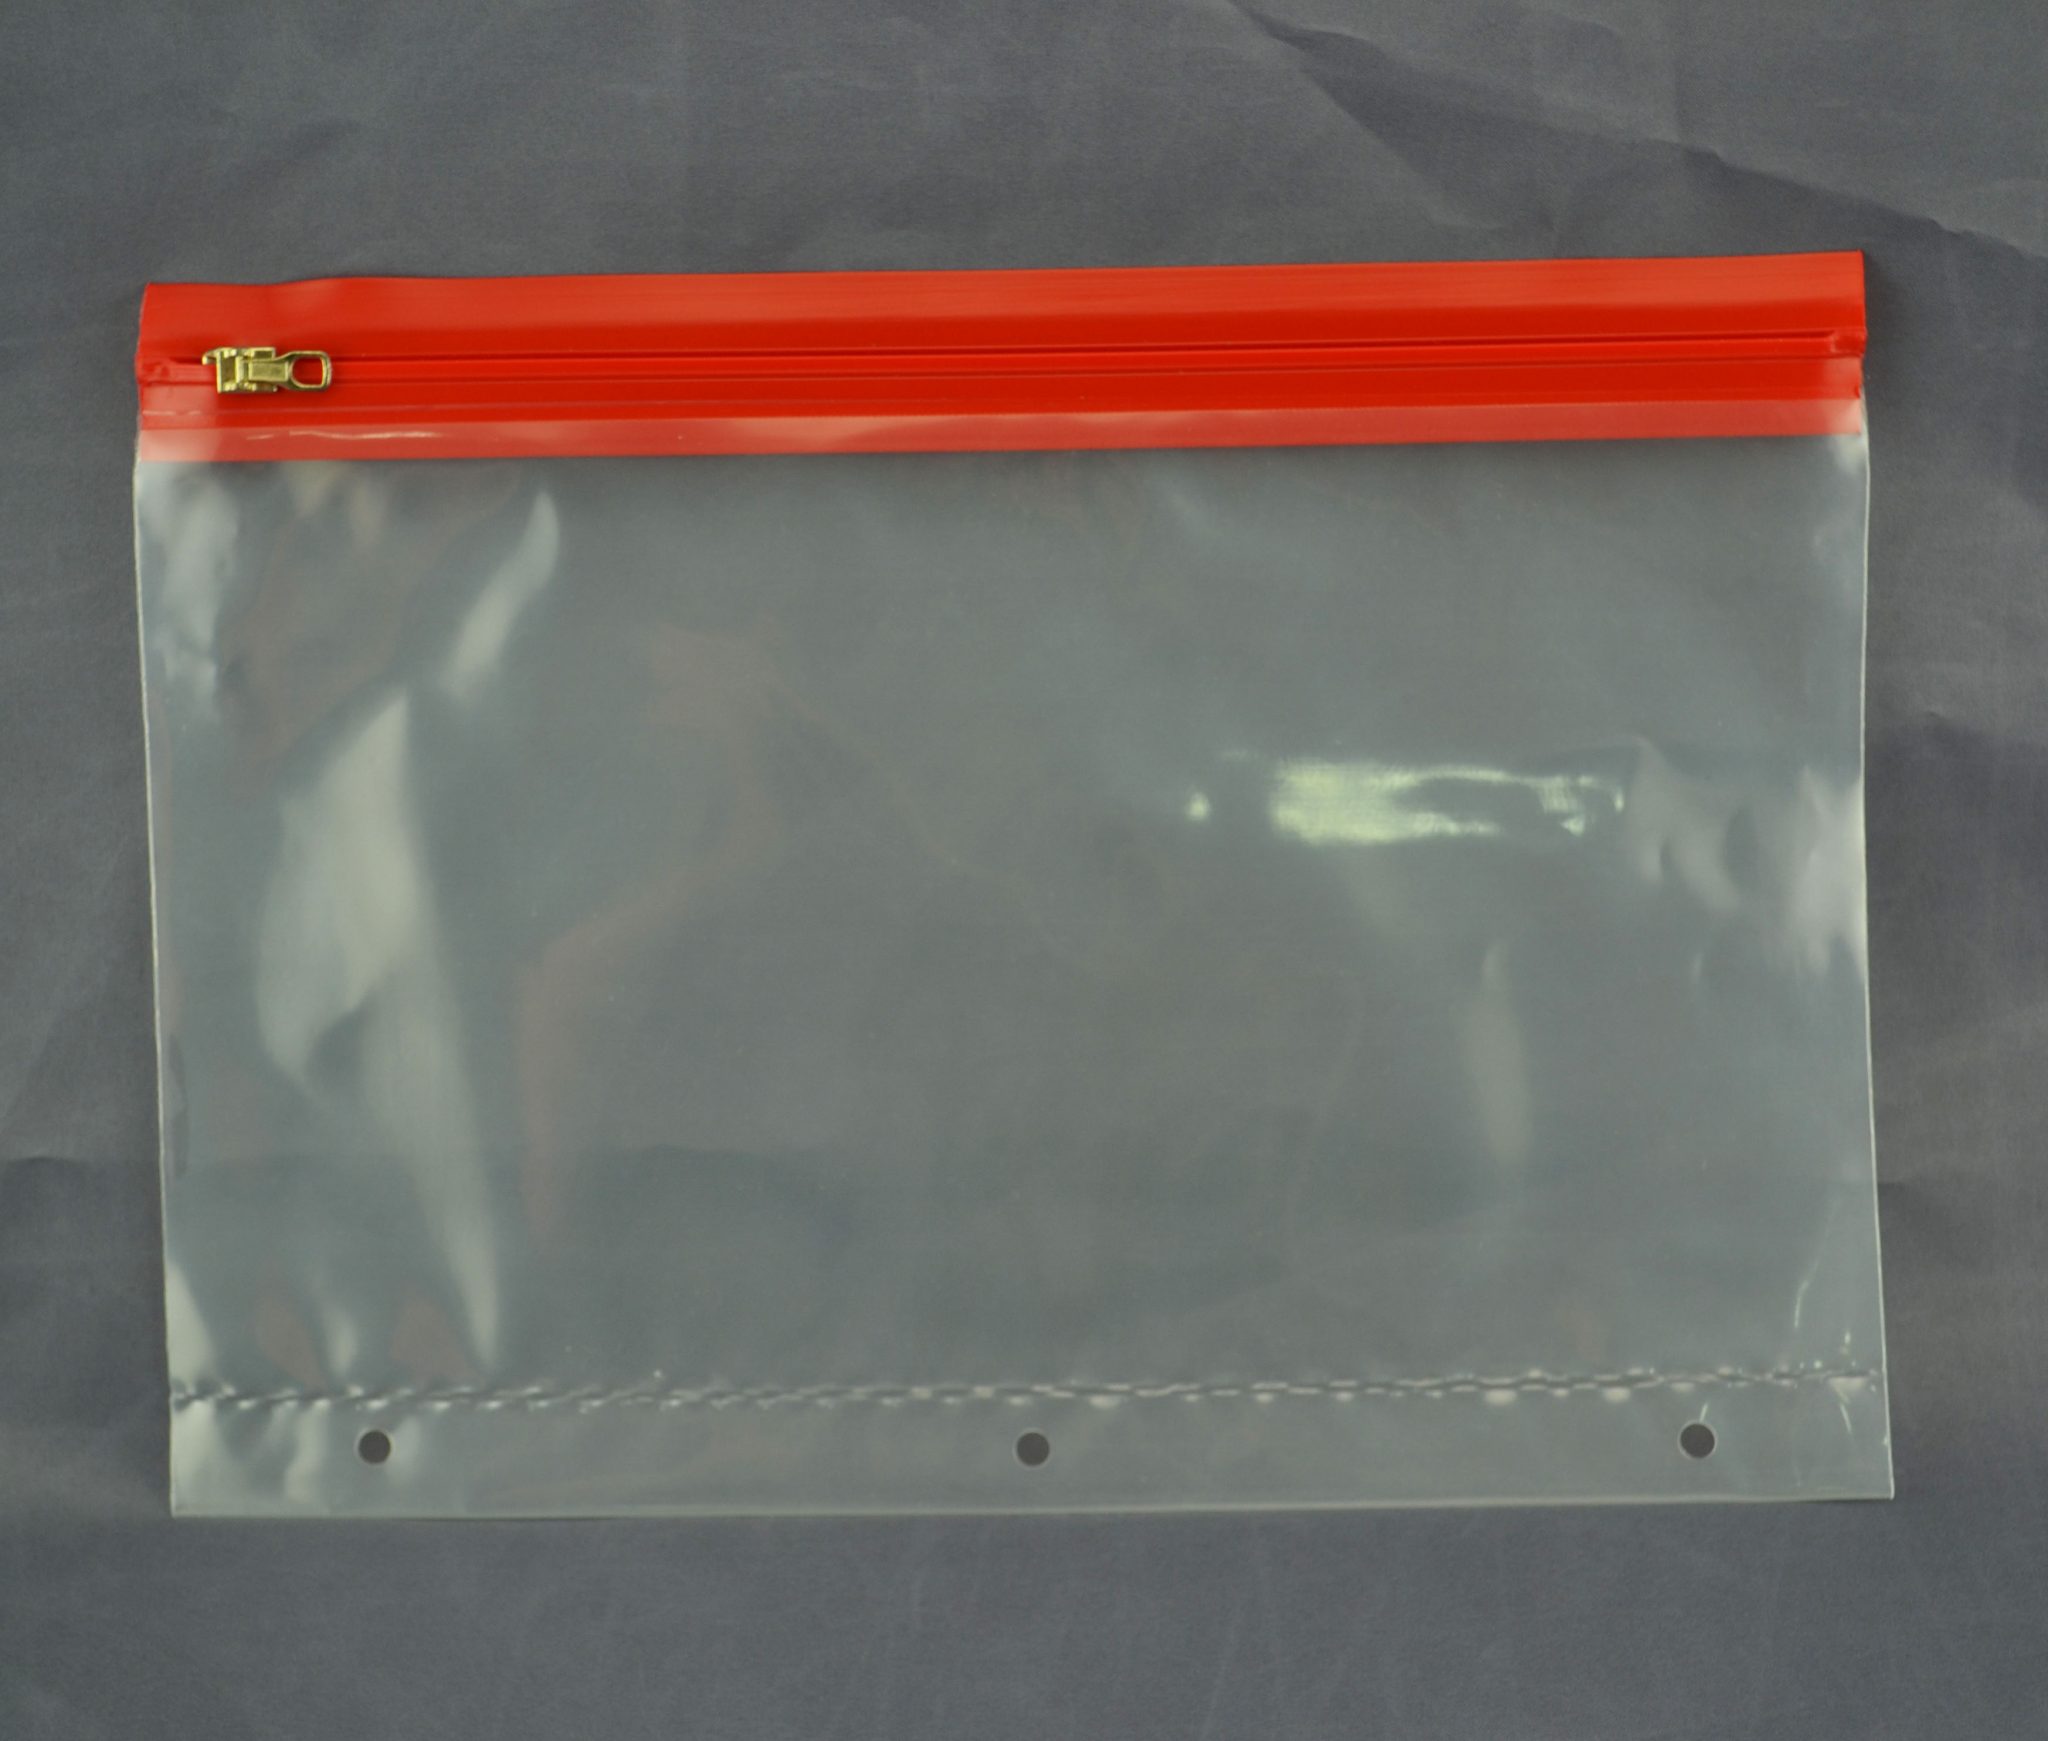 ZIPAFILE® with plain profile and 3-hole punch bottom